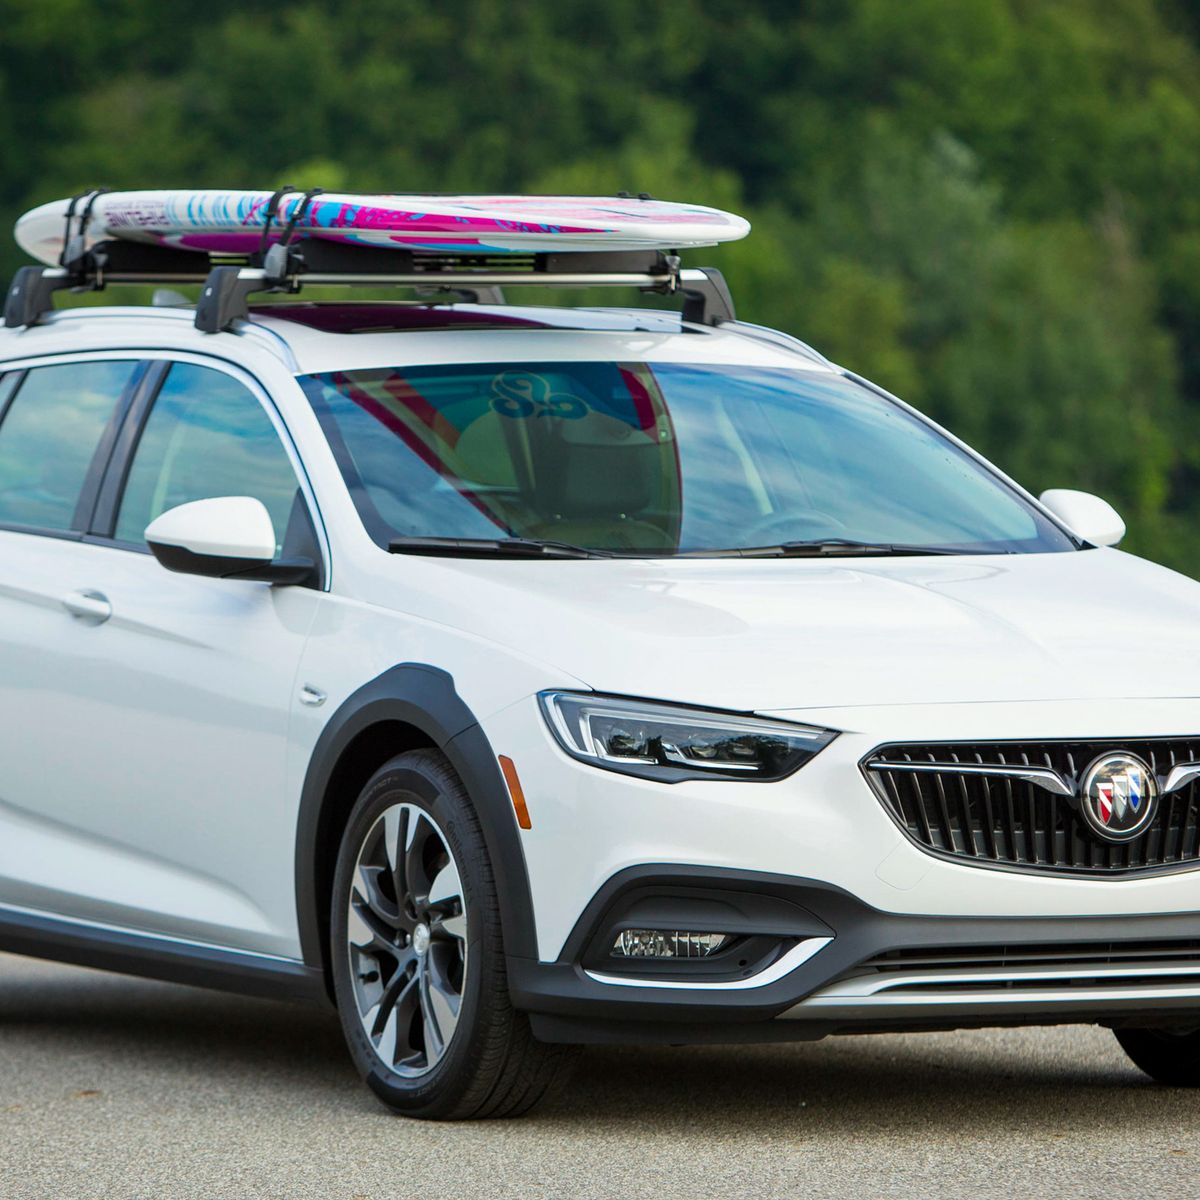 2018 Buick Regal Arrives With Sportback And TourX Body Styles